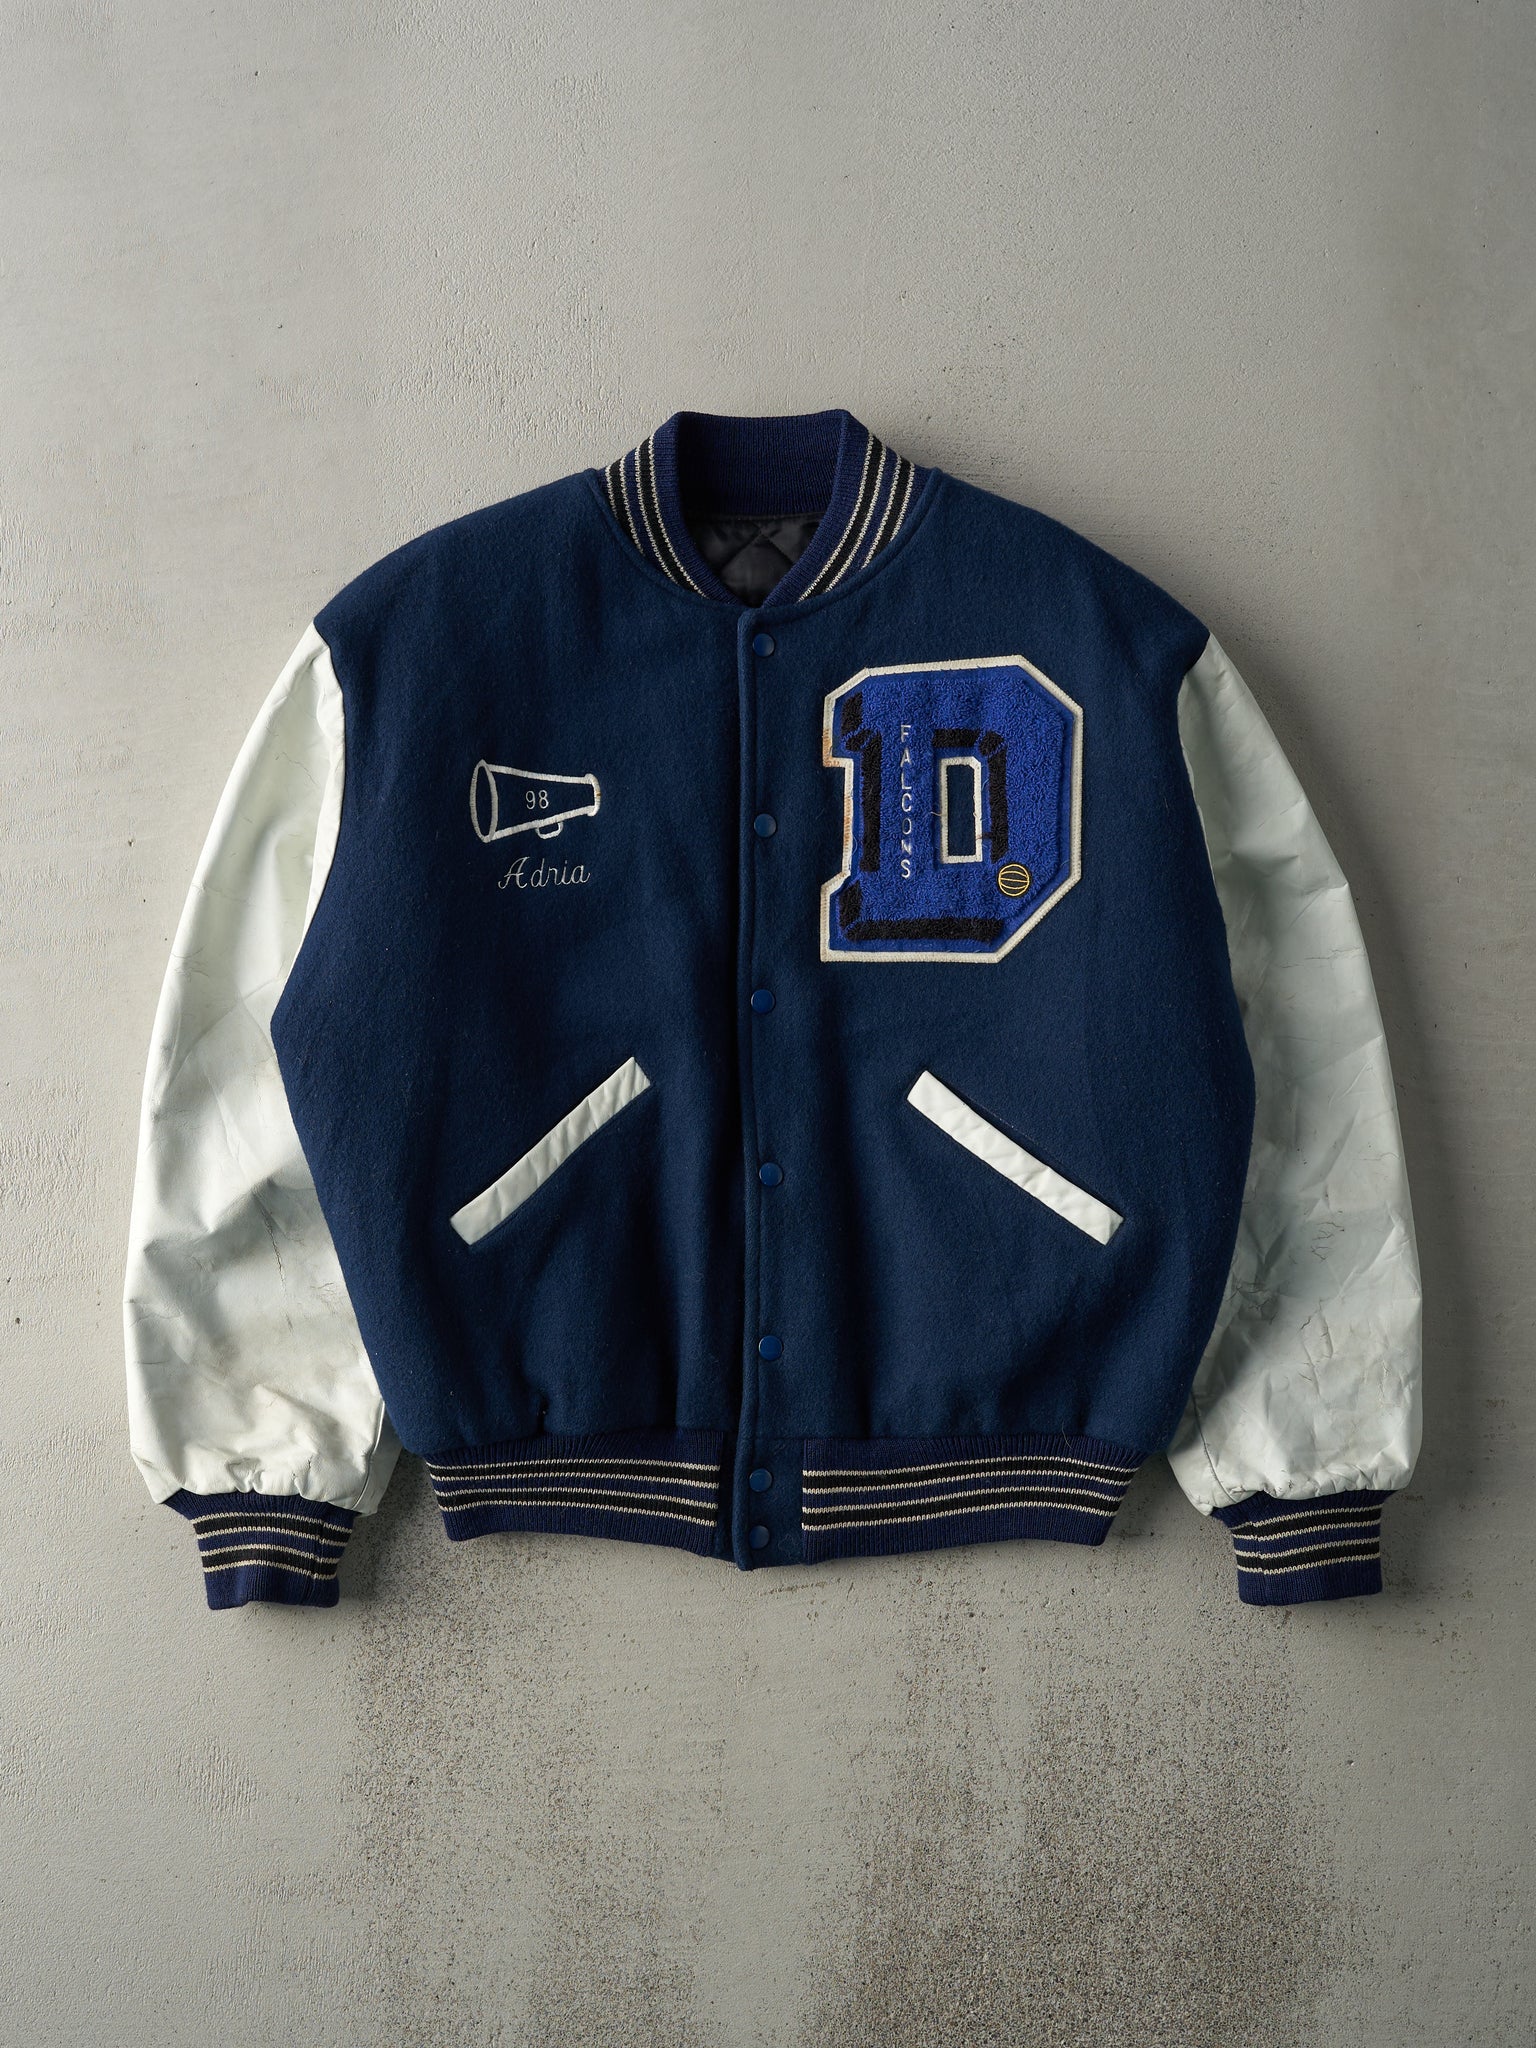 Vintage 98' Navy and White Falcons Boxy Letterman Jacket (L)